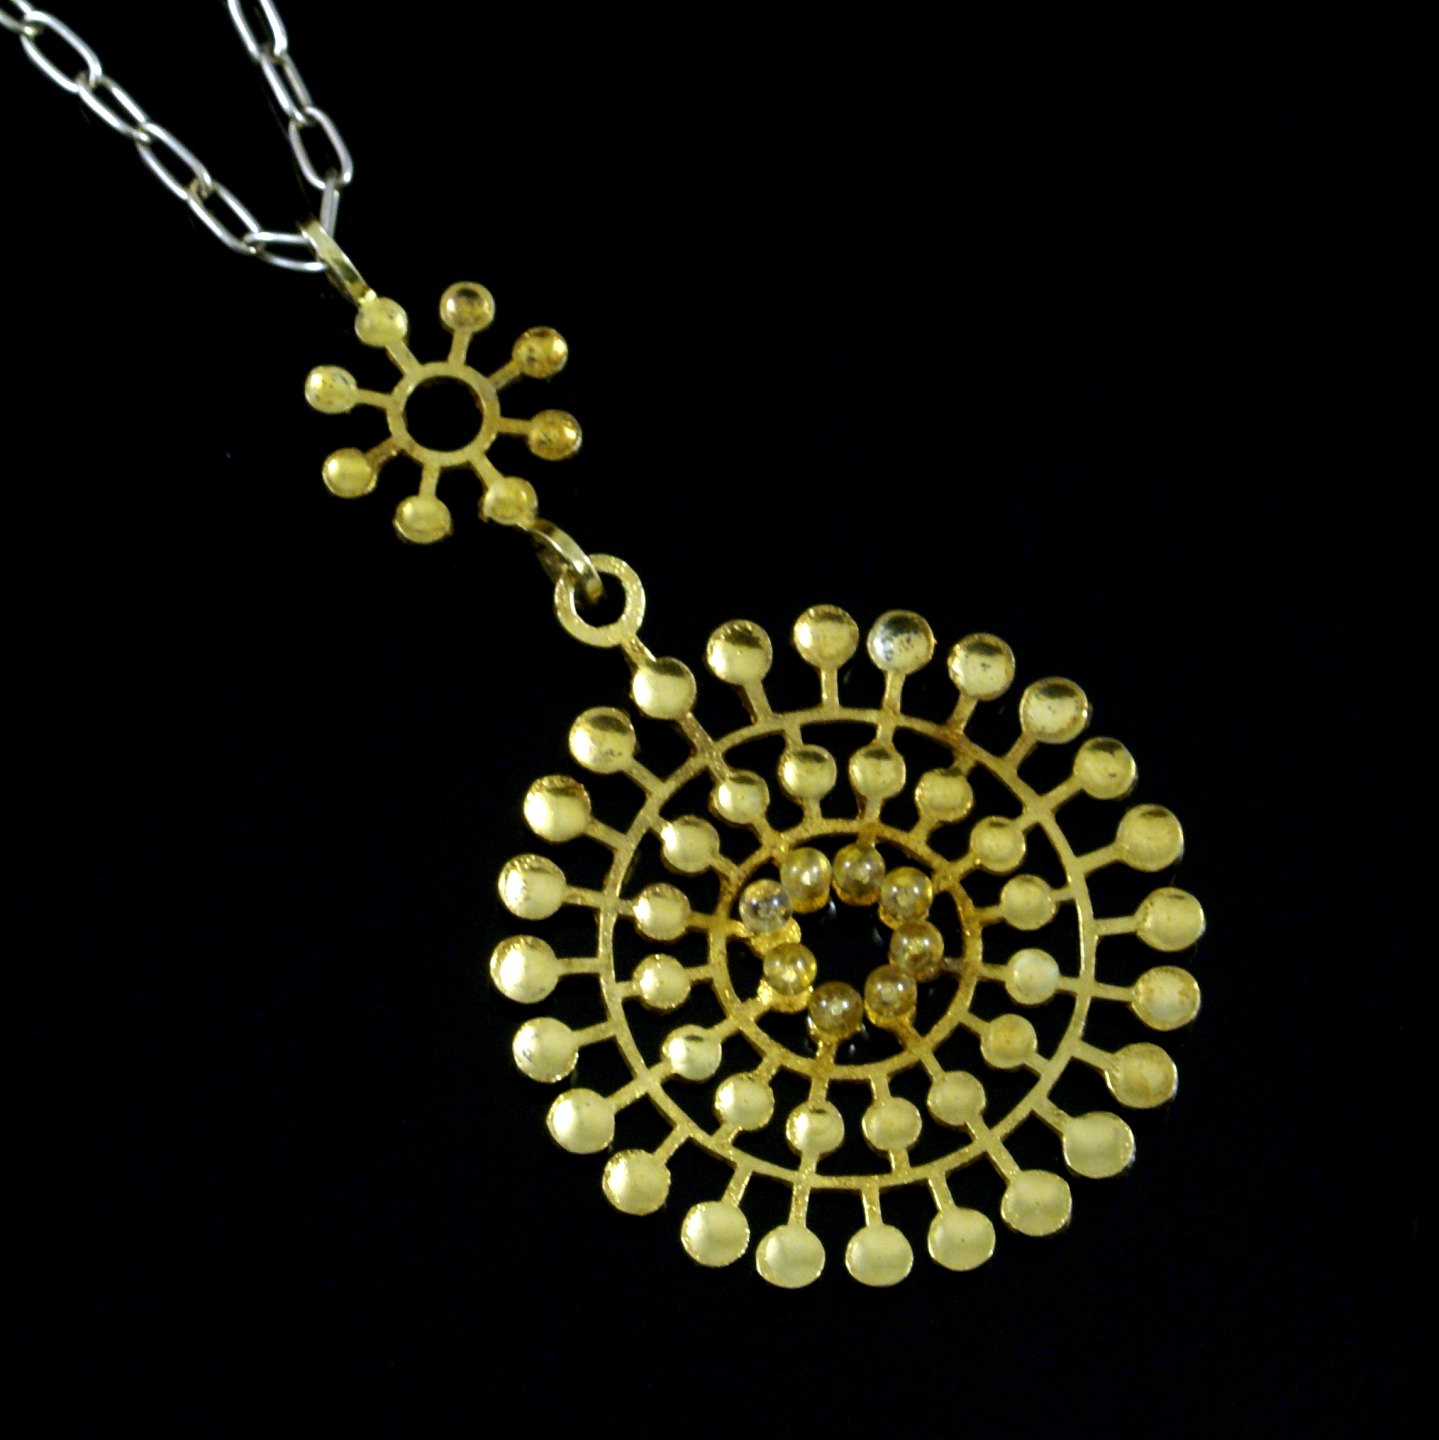 WorldAntique.net - Bent Exner (1932-2006). Sterling Silver Pendant Necklace with small acrylic glass balls.